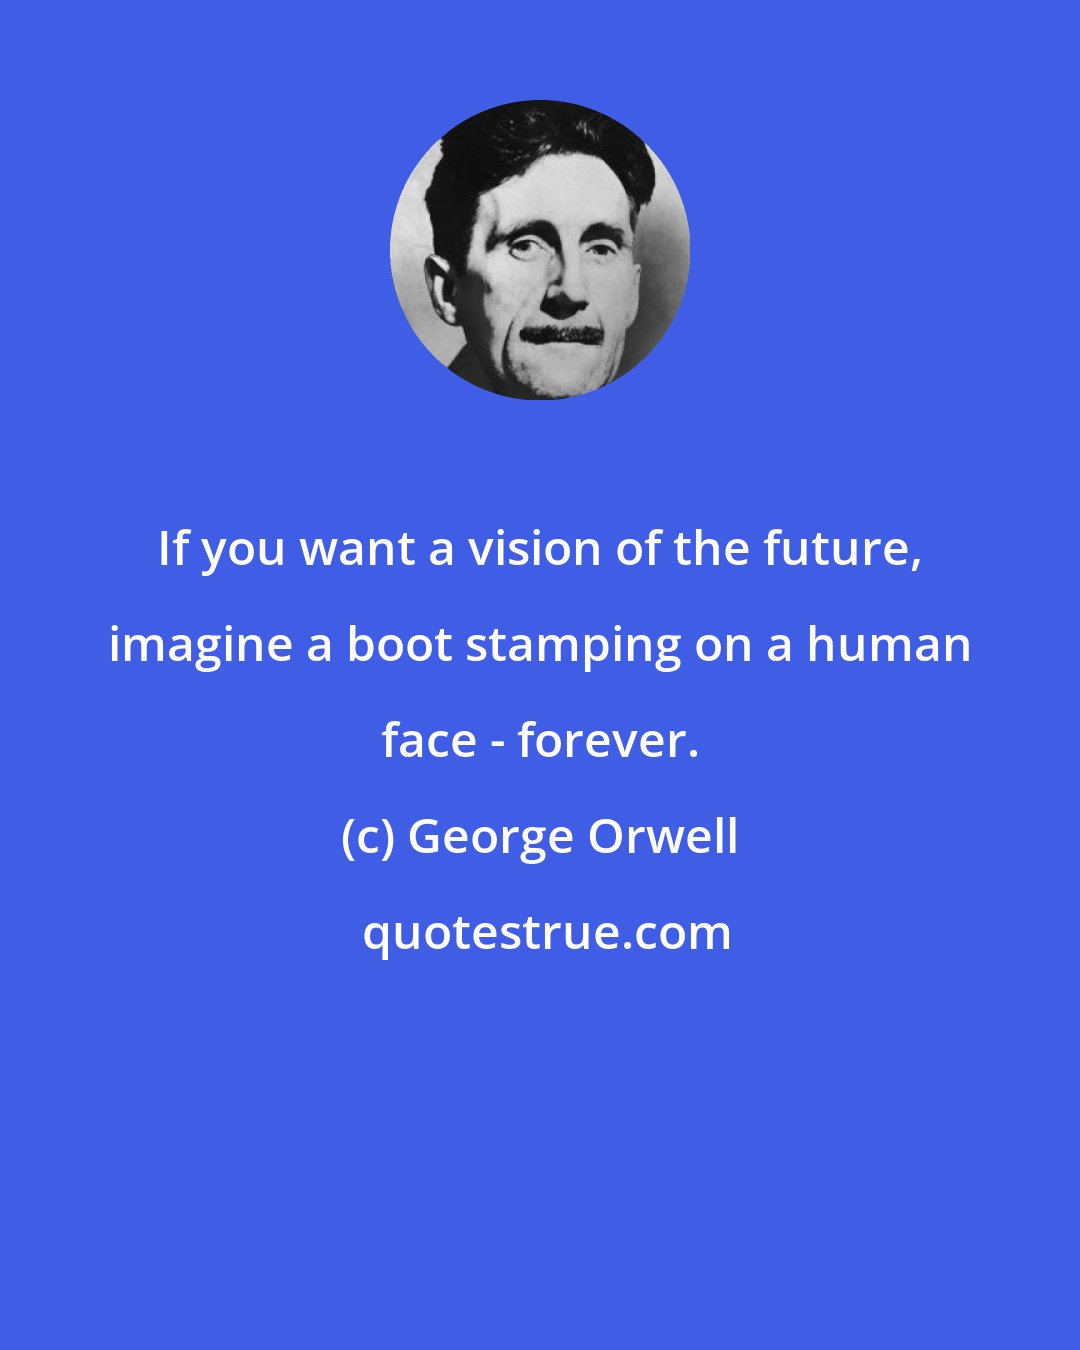 George Orwell: If you want a vision of the future, imagine a boot stamping on a human face - forever.